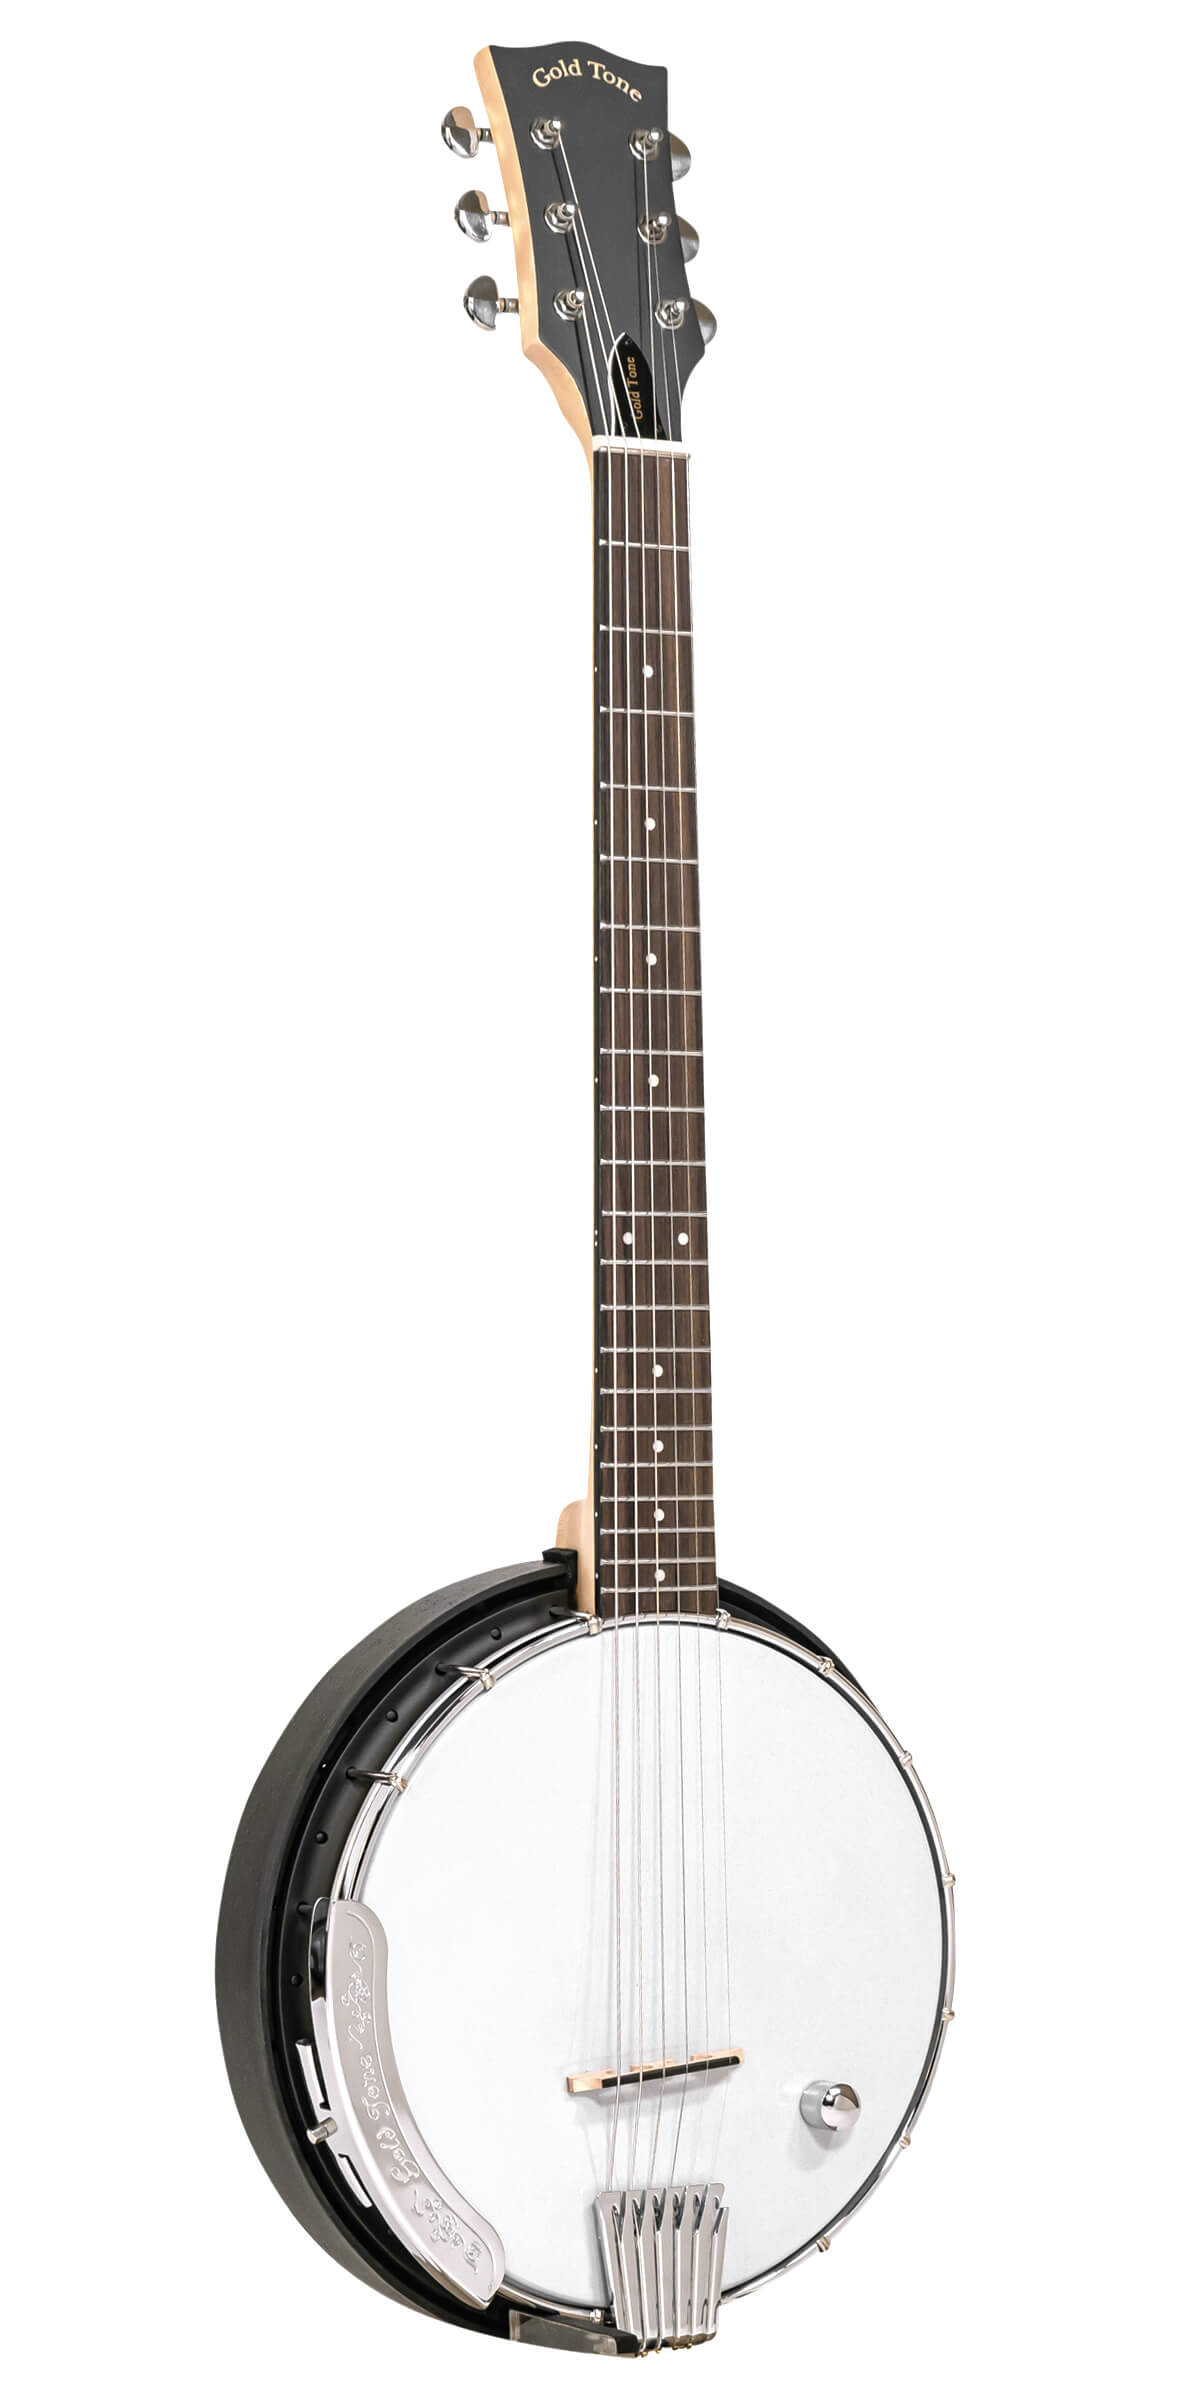 is meer dan Conciërge Perforatie AC-6+: Acoustic Composite Banjitar with Pickup | Gold Tone Folk Instruments